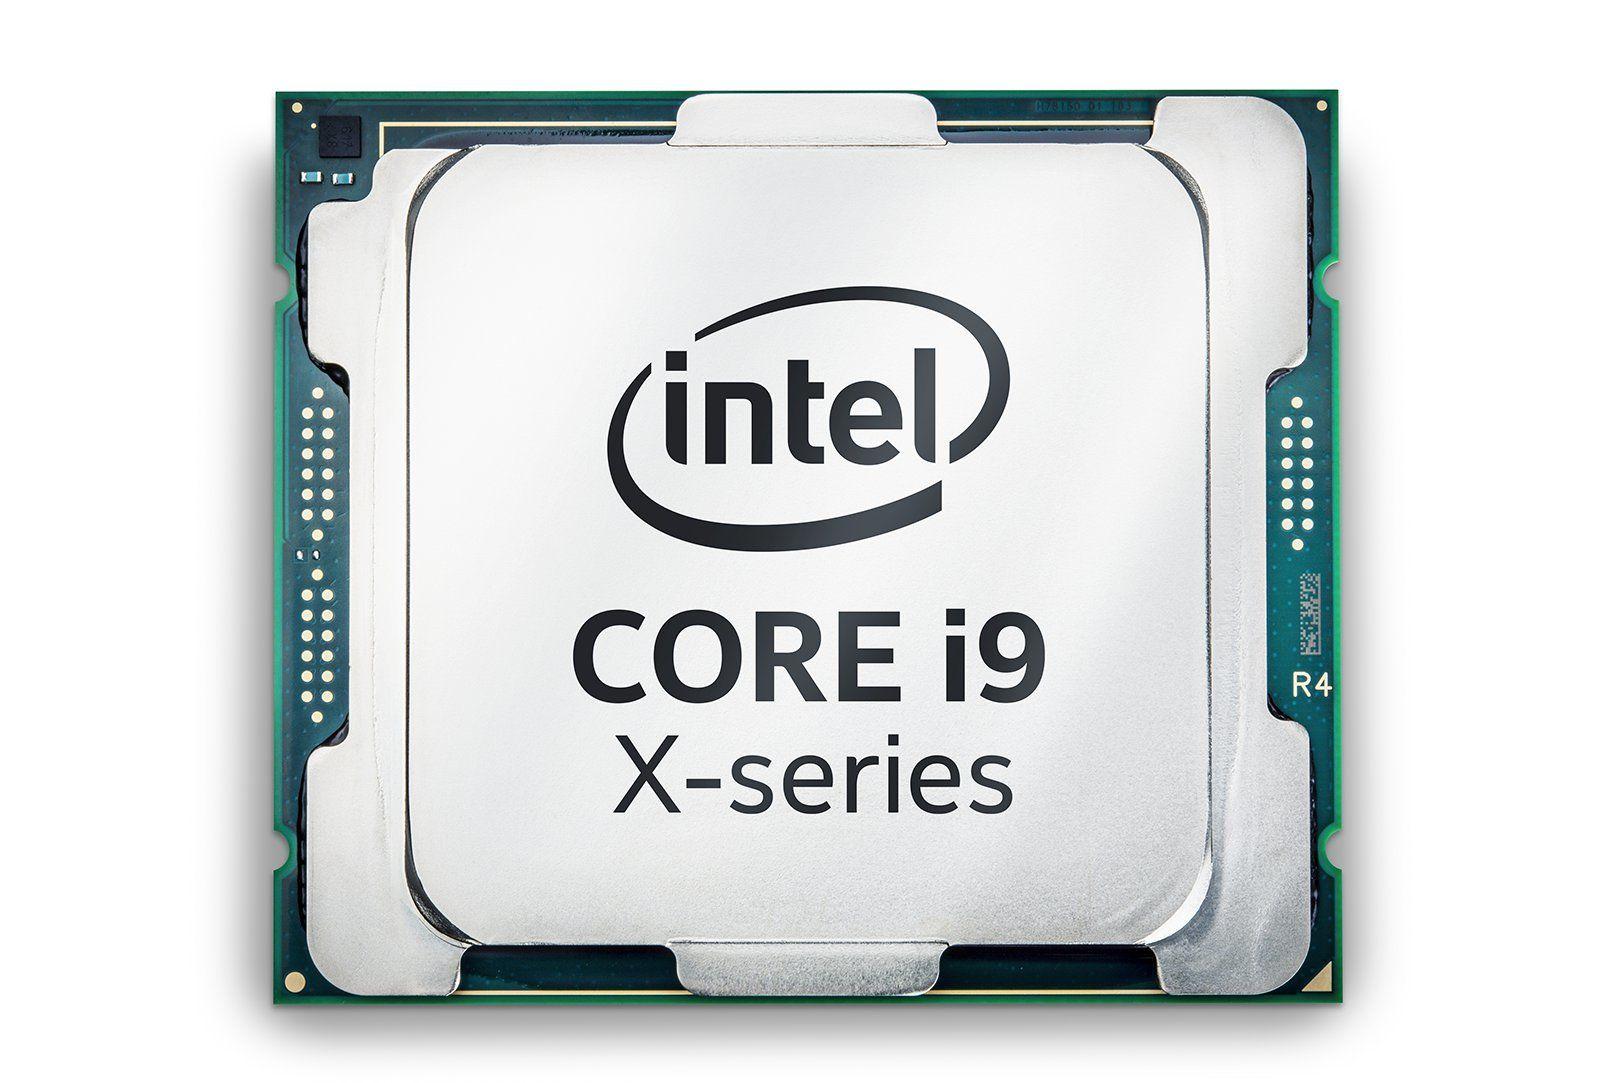 CPU Intel Logo - Intel's Core I9 Extreme Edition CPU Is An 18 Core Beast